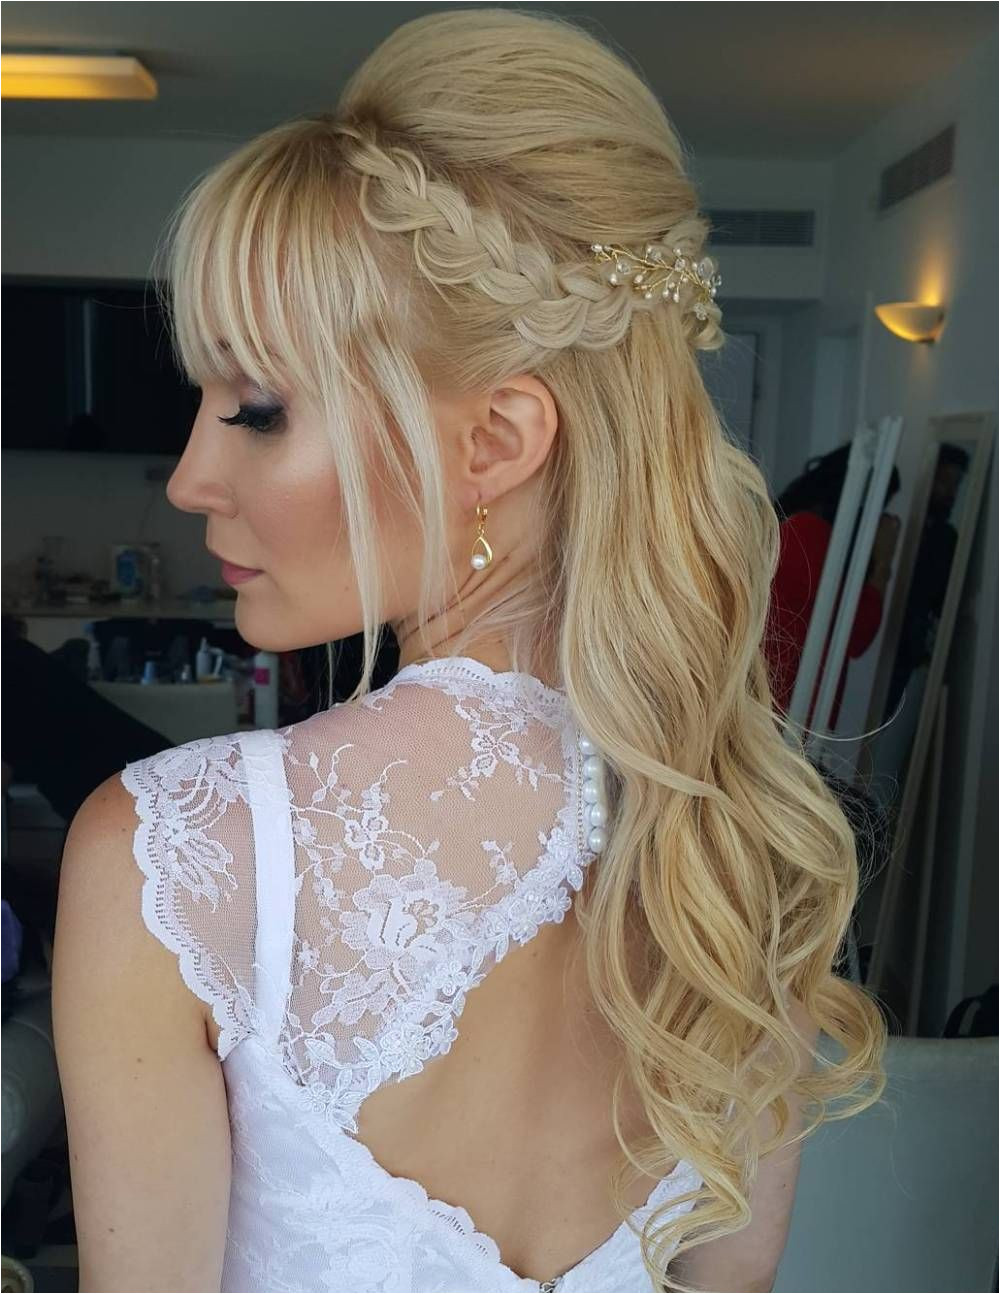 Are you looking for Half Up Half Down Wedding Hairstyles See our collection full of Half Up Half Down Wedding Hairstyles and inspired